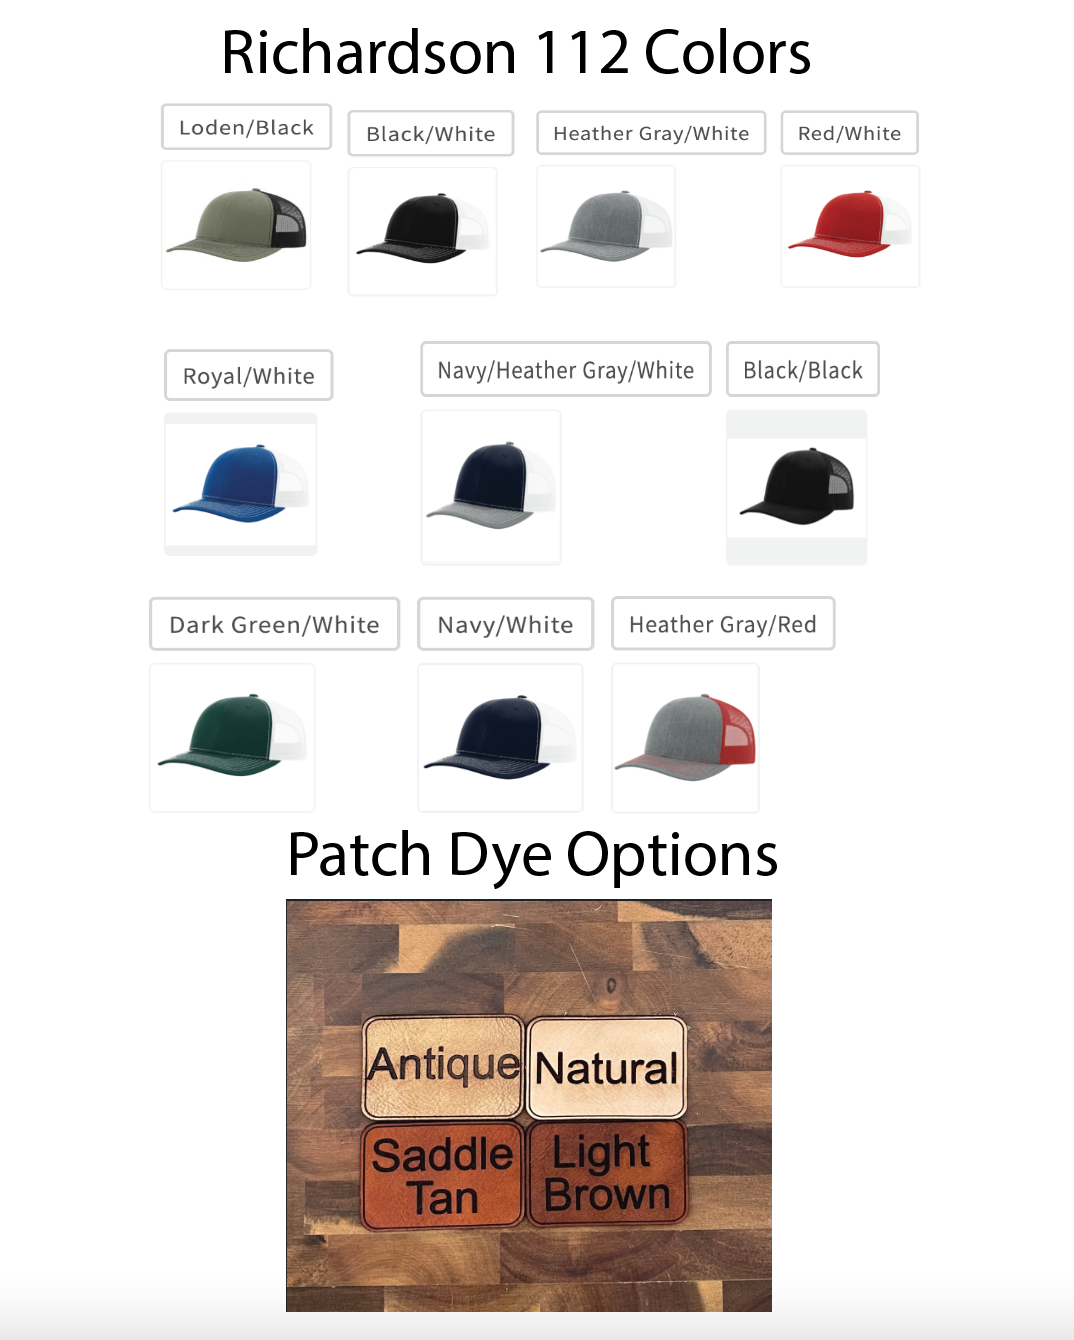 Custom Dad Leather Patch Hat